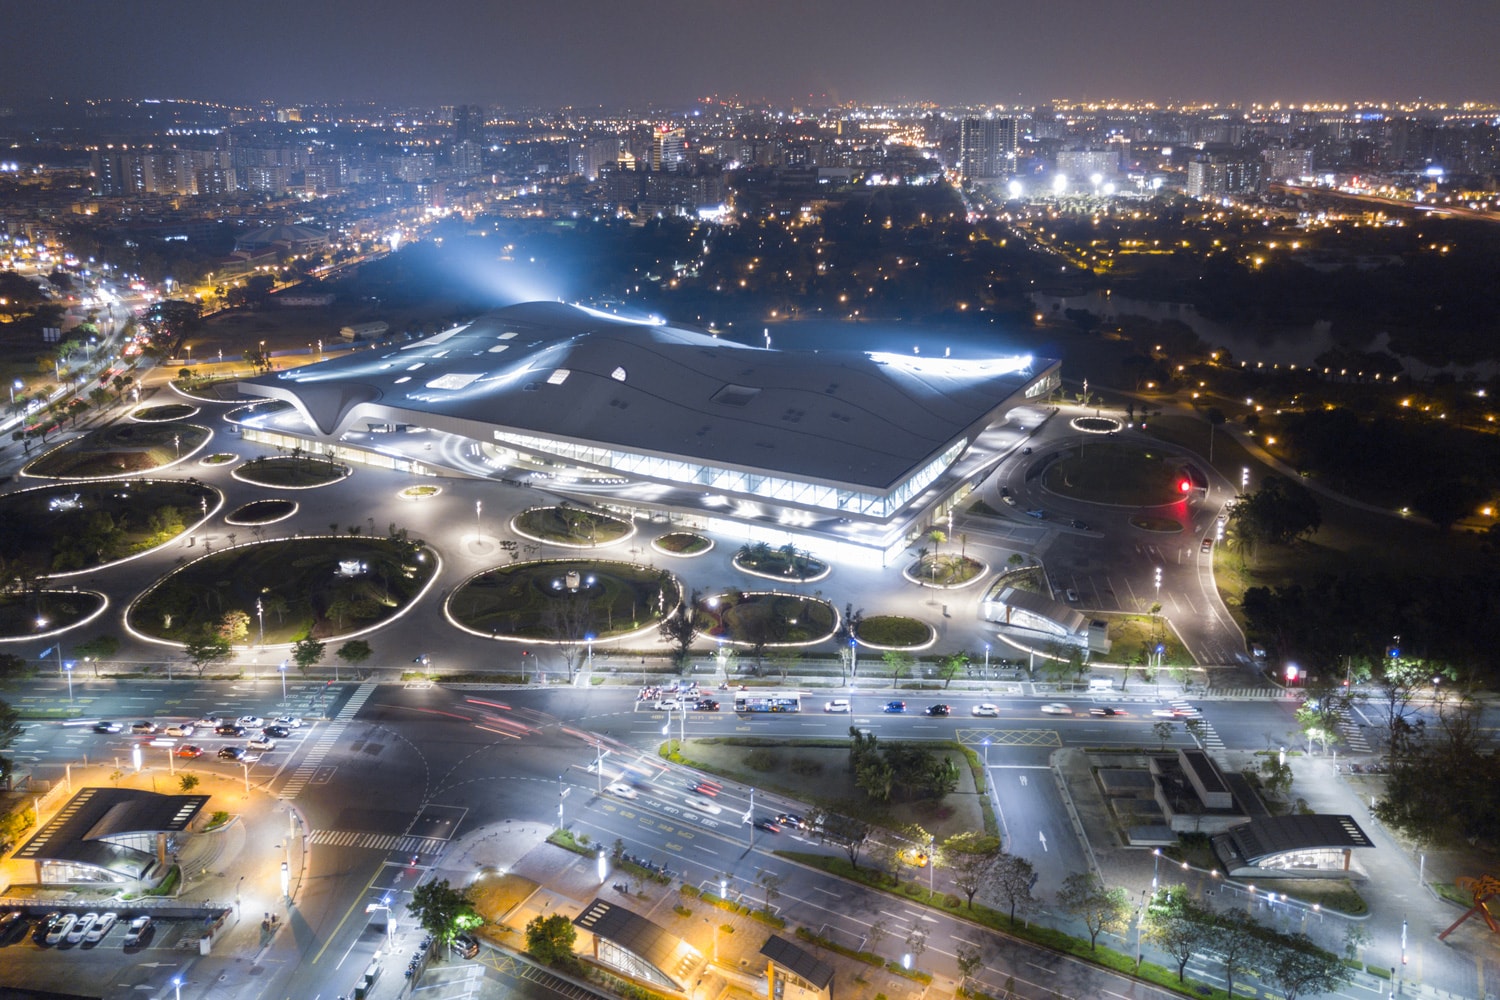 National Kaohsiung Center for the Arts taiwan weiwuying world's largest performance arts center mecanoo architecture photos